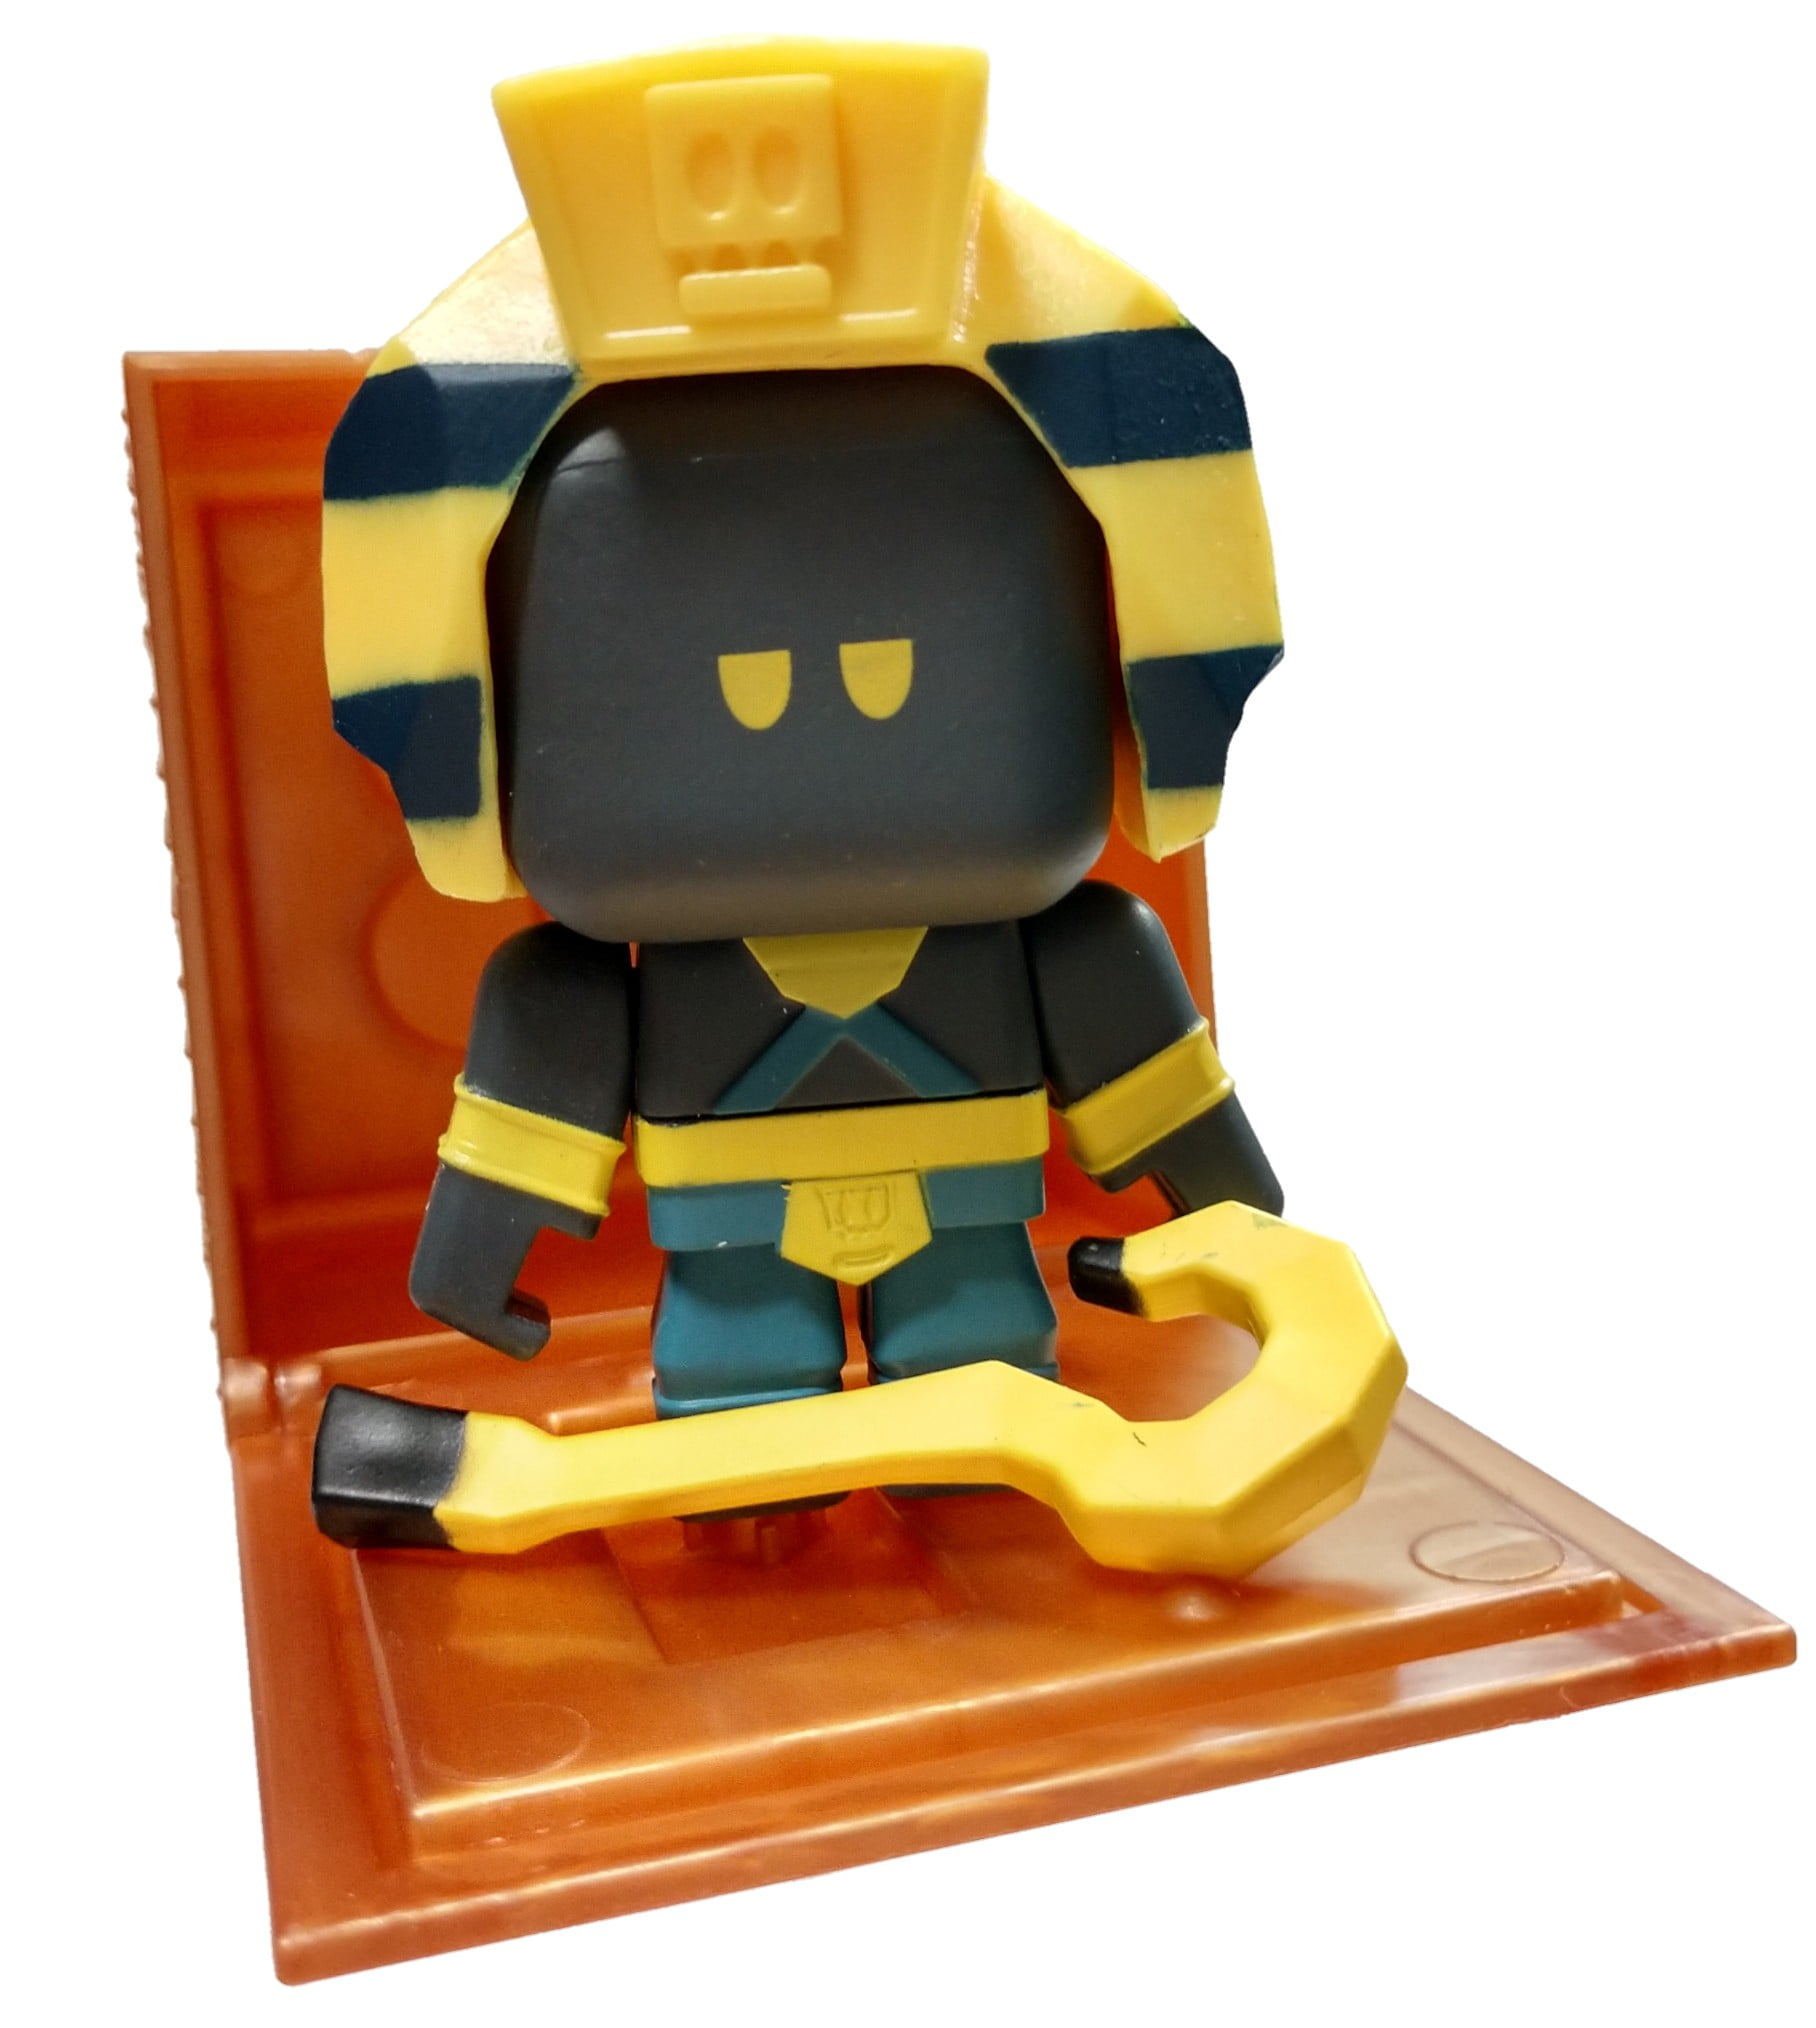 Roblox Series 8 Sharkbyte Studios Egyptian Keeper Mini Figure With Cube And Online Code No Packaging Walmart Com Walmart Com - summer studios roblox